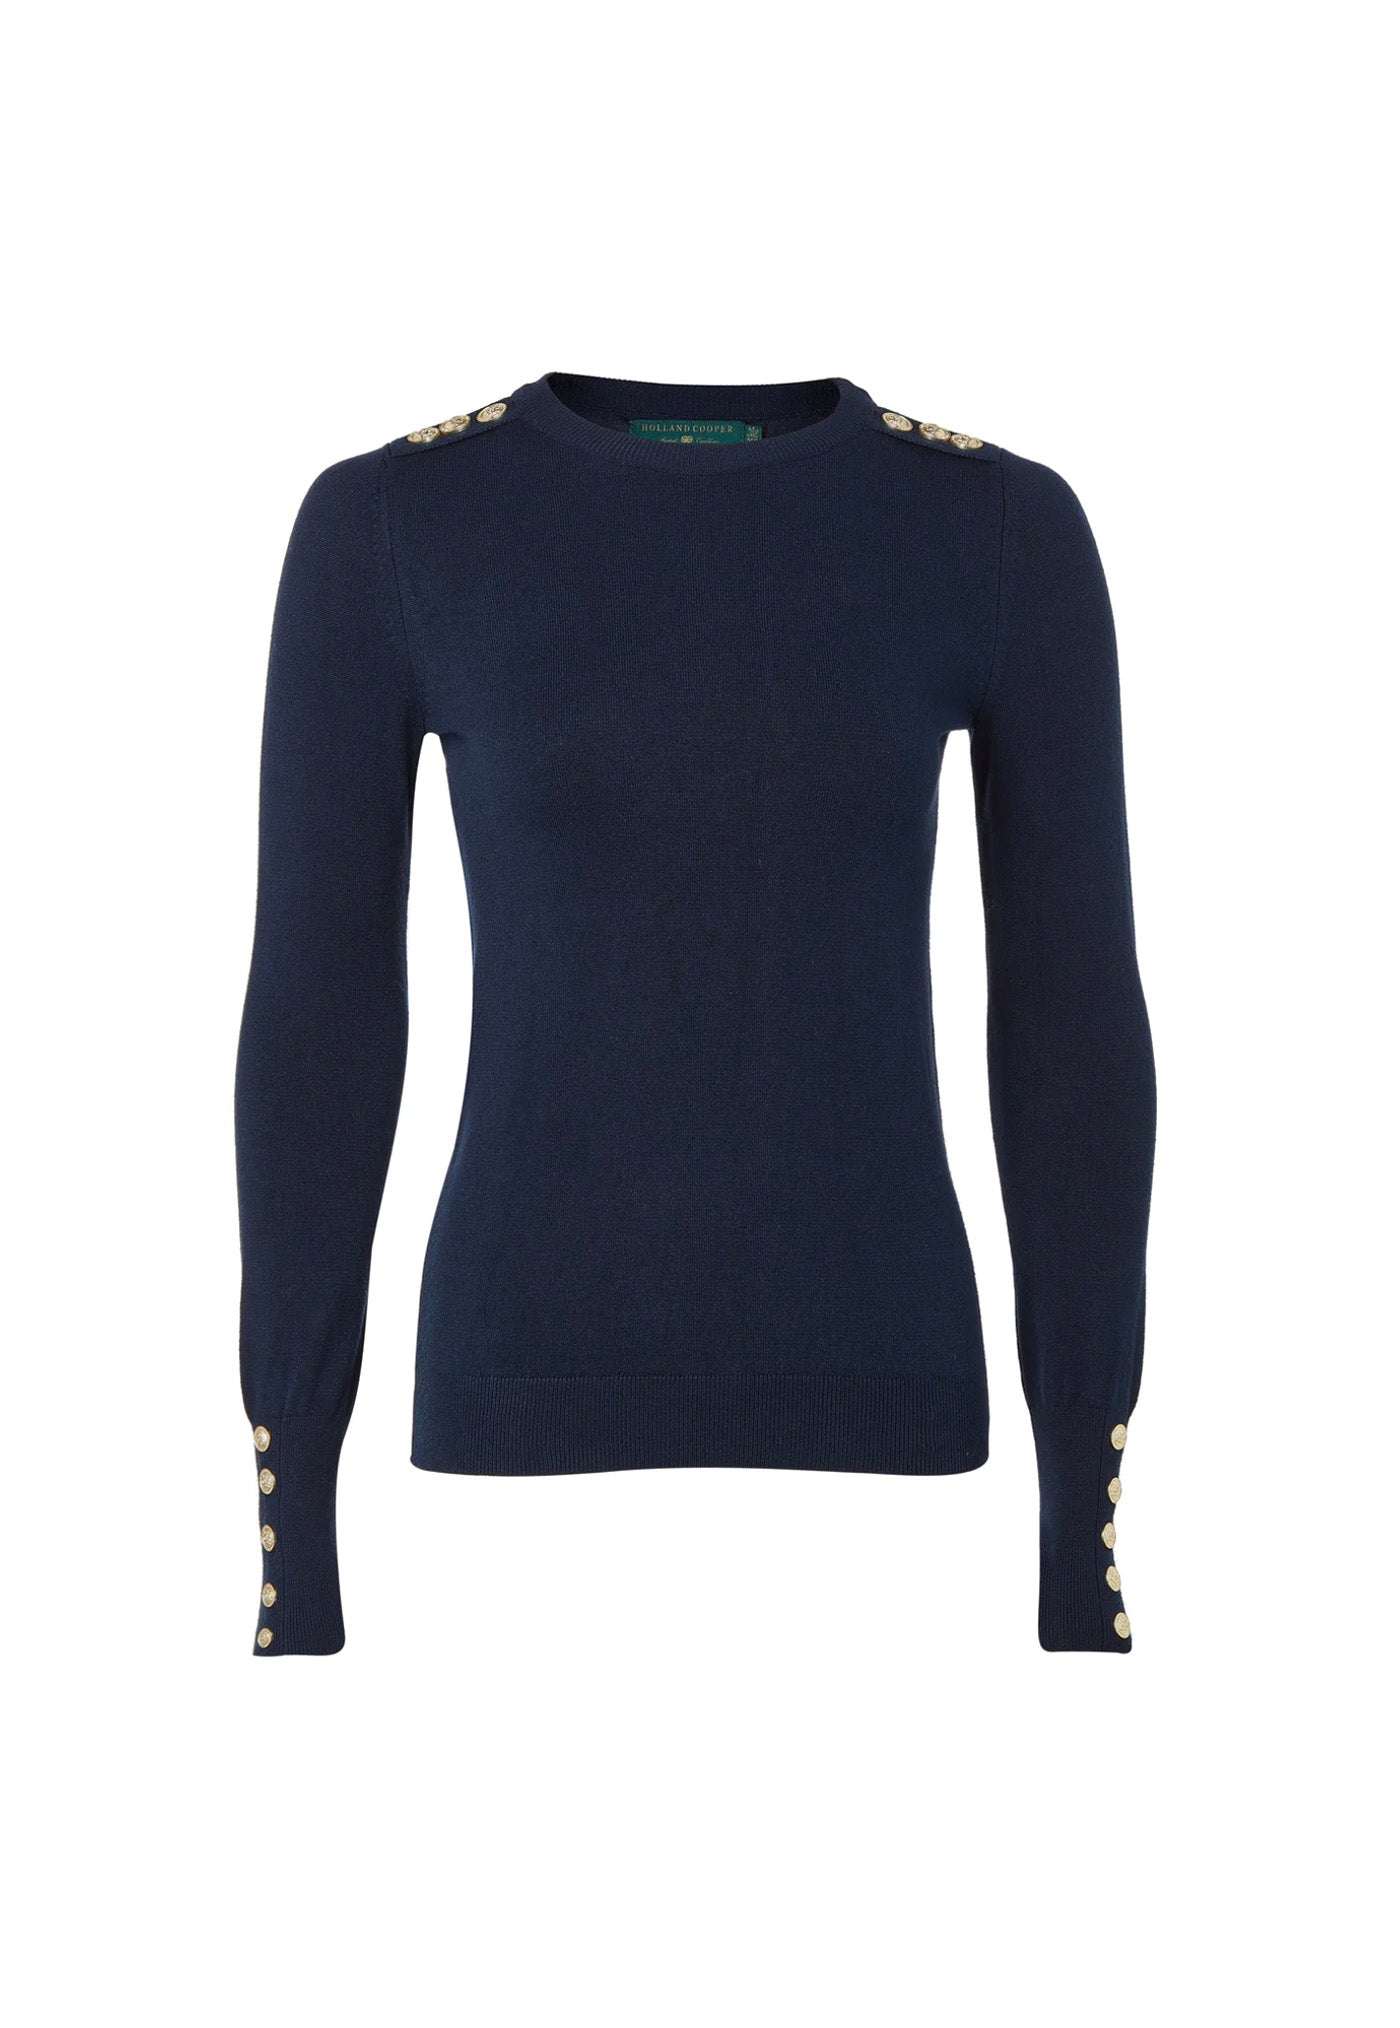 Buttoned Knit Crew Neck - Ink Navy sold by Angel Divine